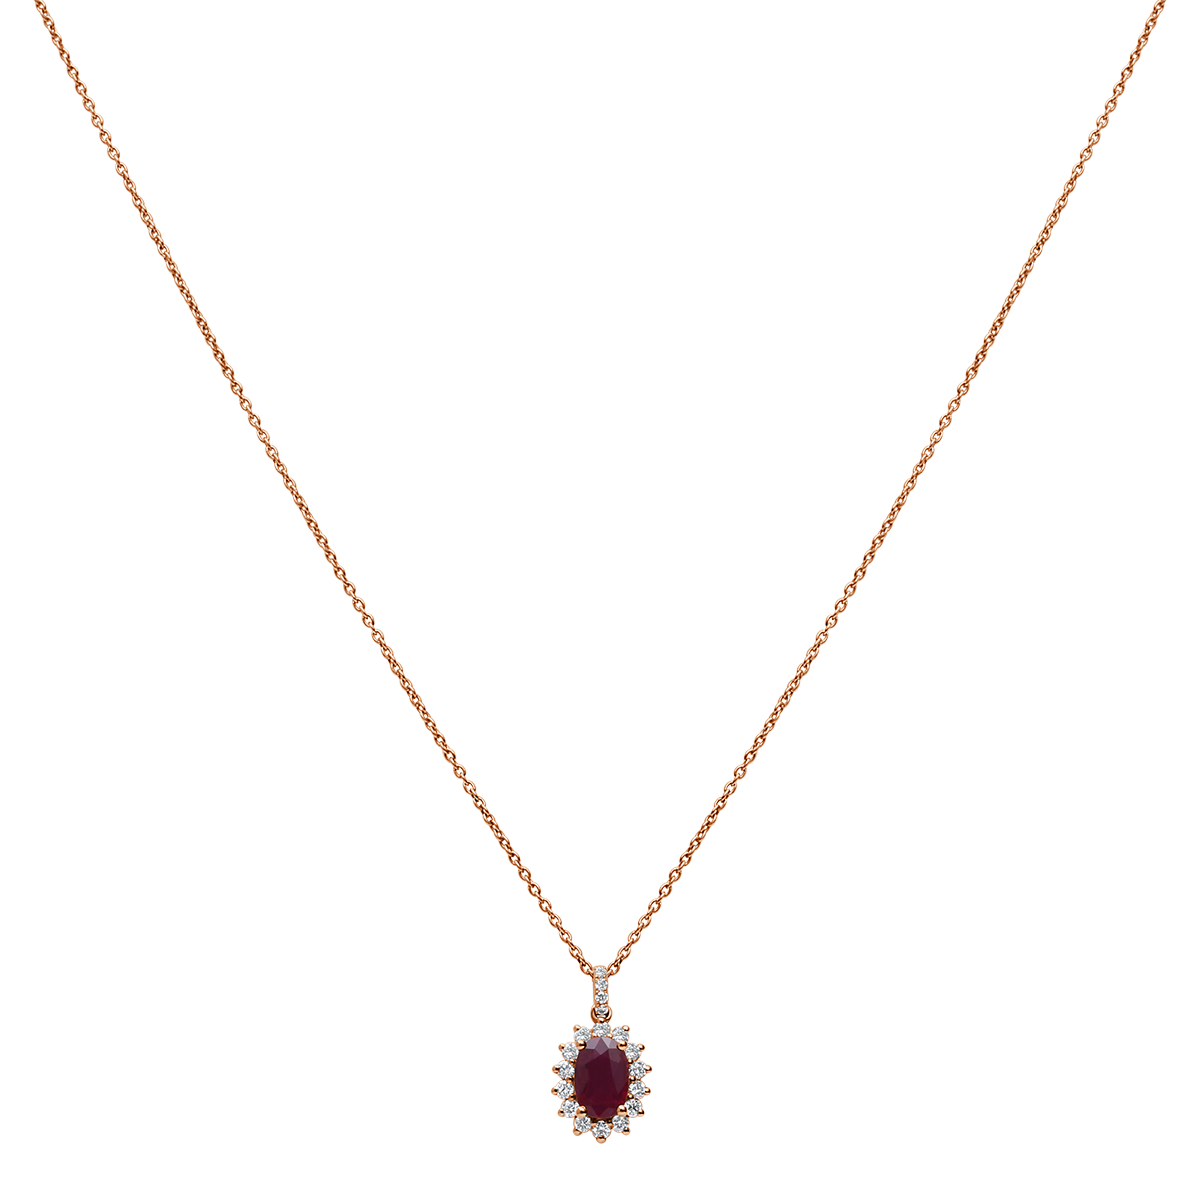 Oval Gemstone Diana Pendant From Precious Collection